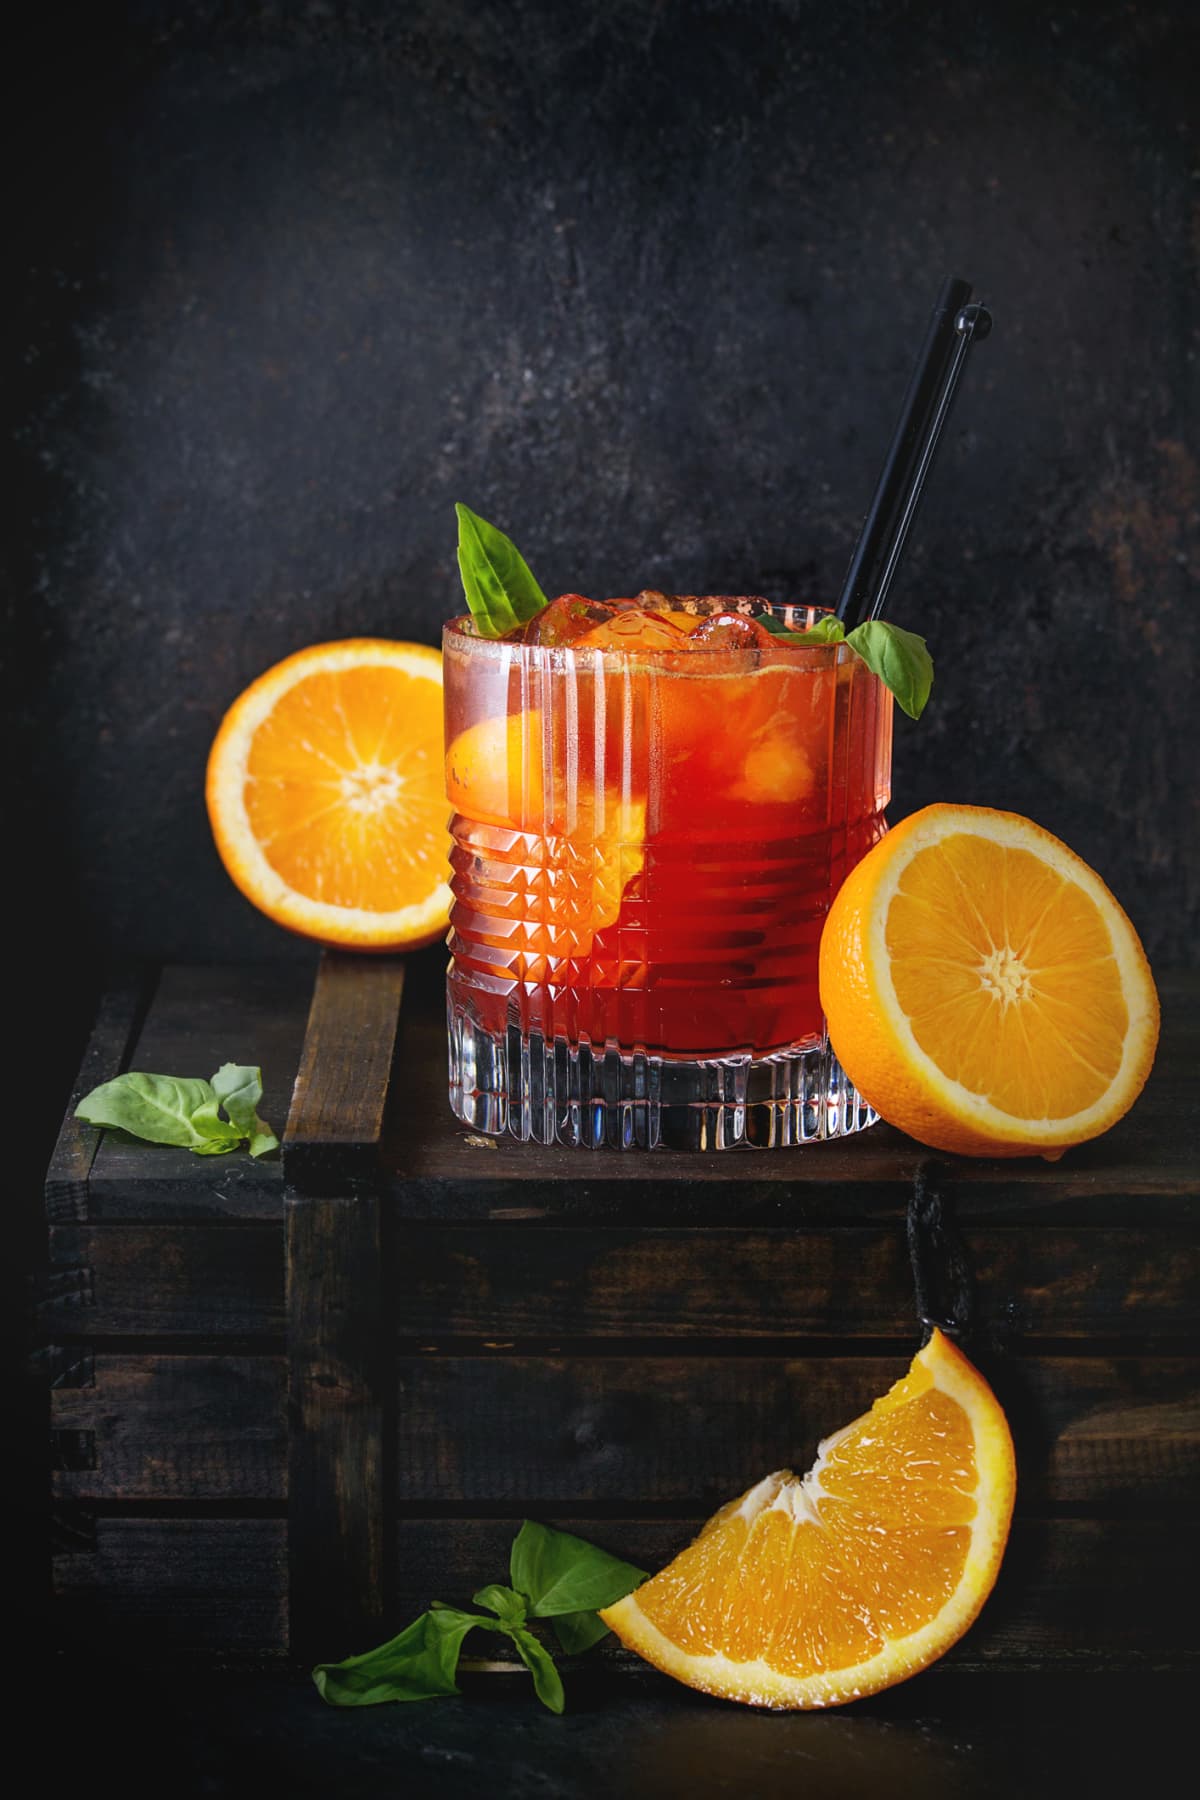 Alcohol cocktail Negroni with sliced orange and basil leaves, served on wooden box over black background.